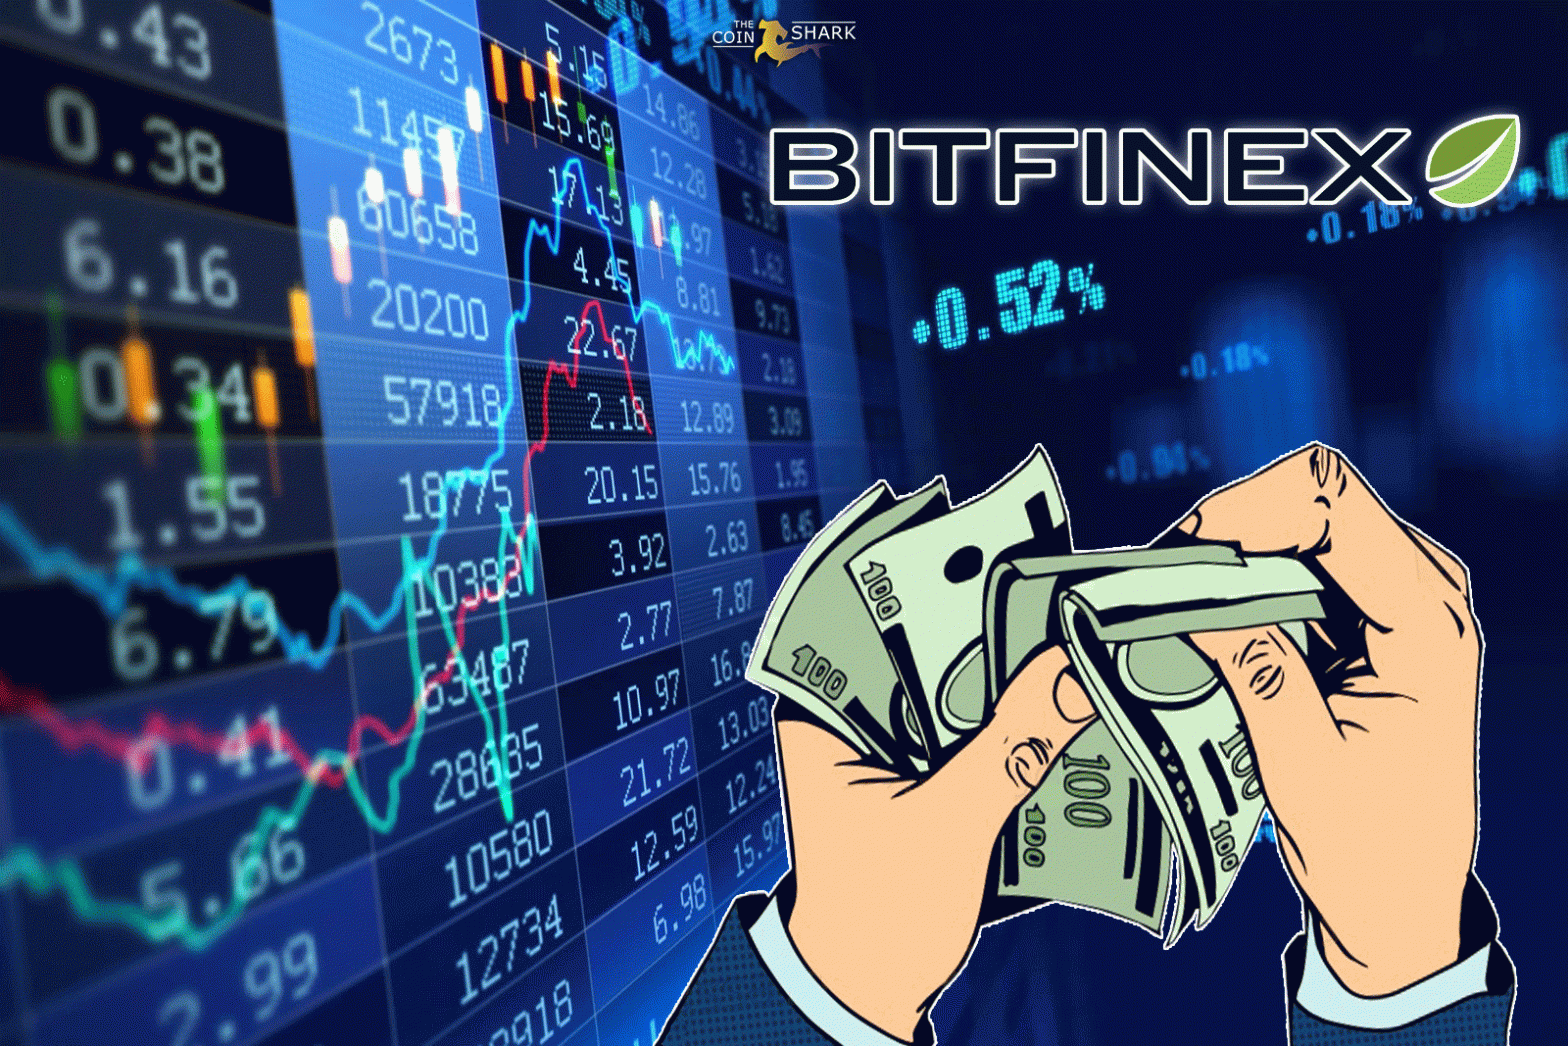 Bitcoin bitfinex tether major players in cryptocurrency